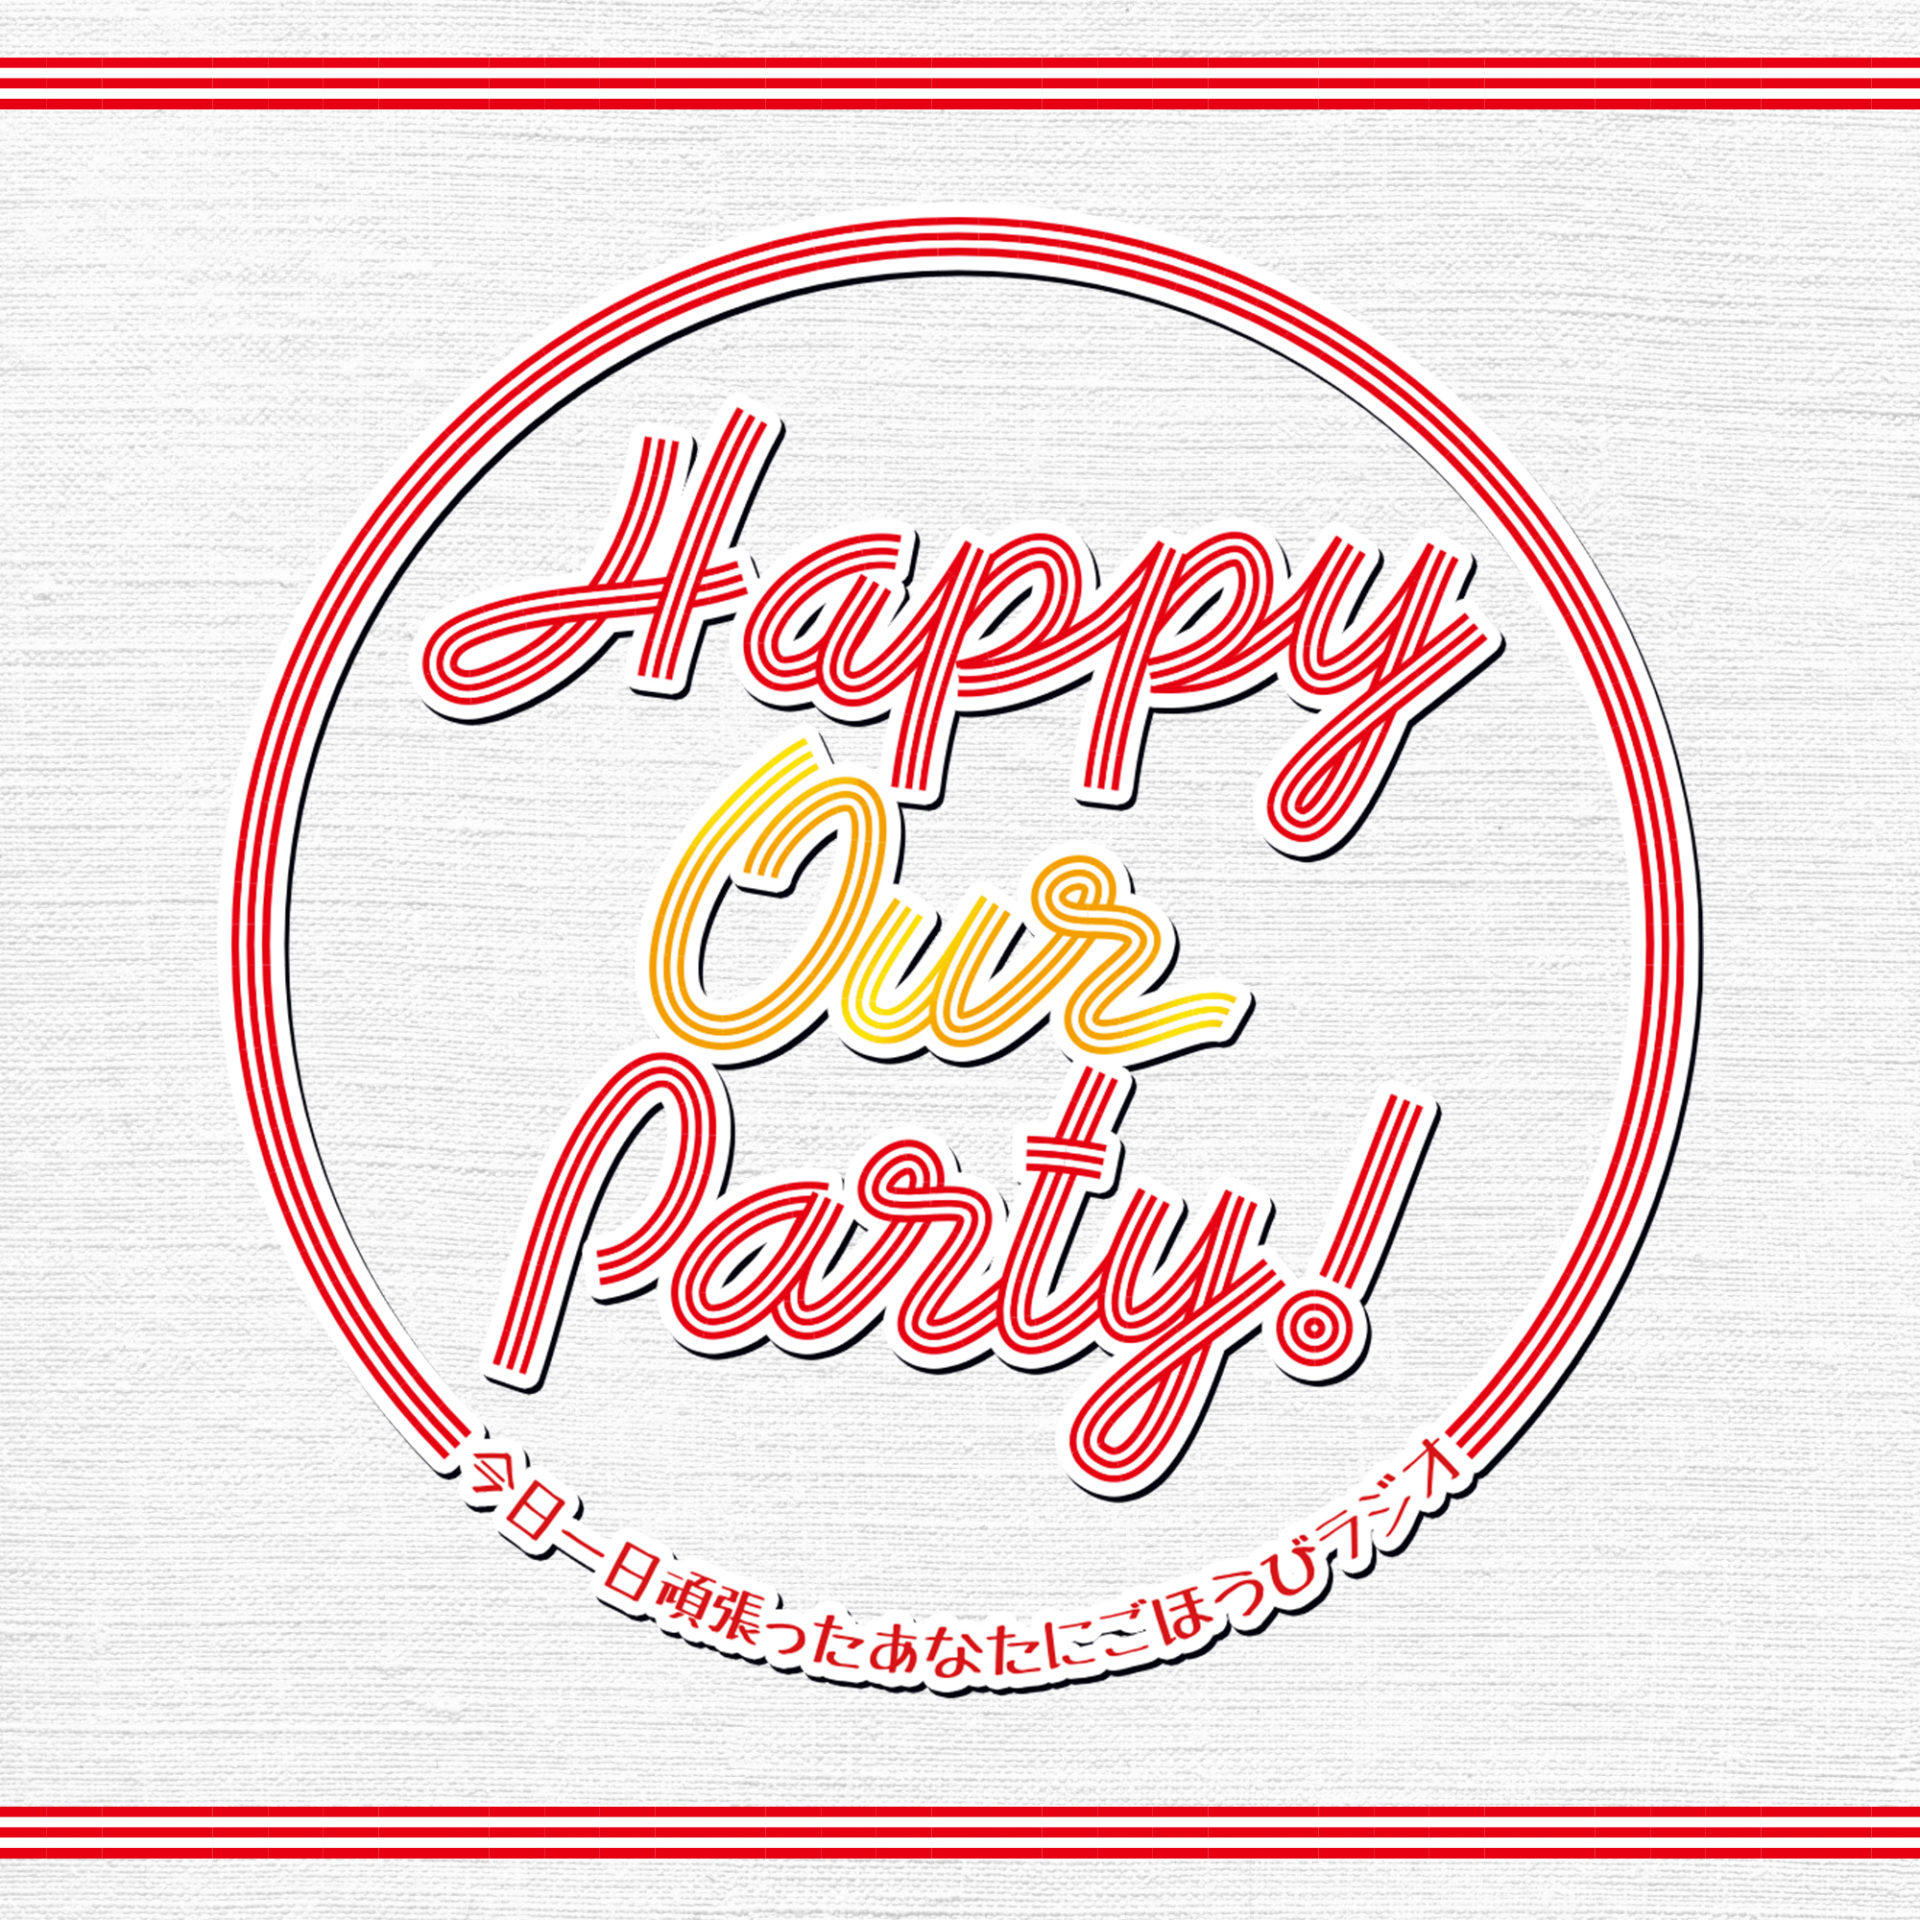 Happy Our Party!